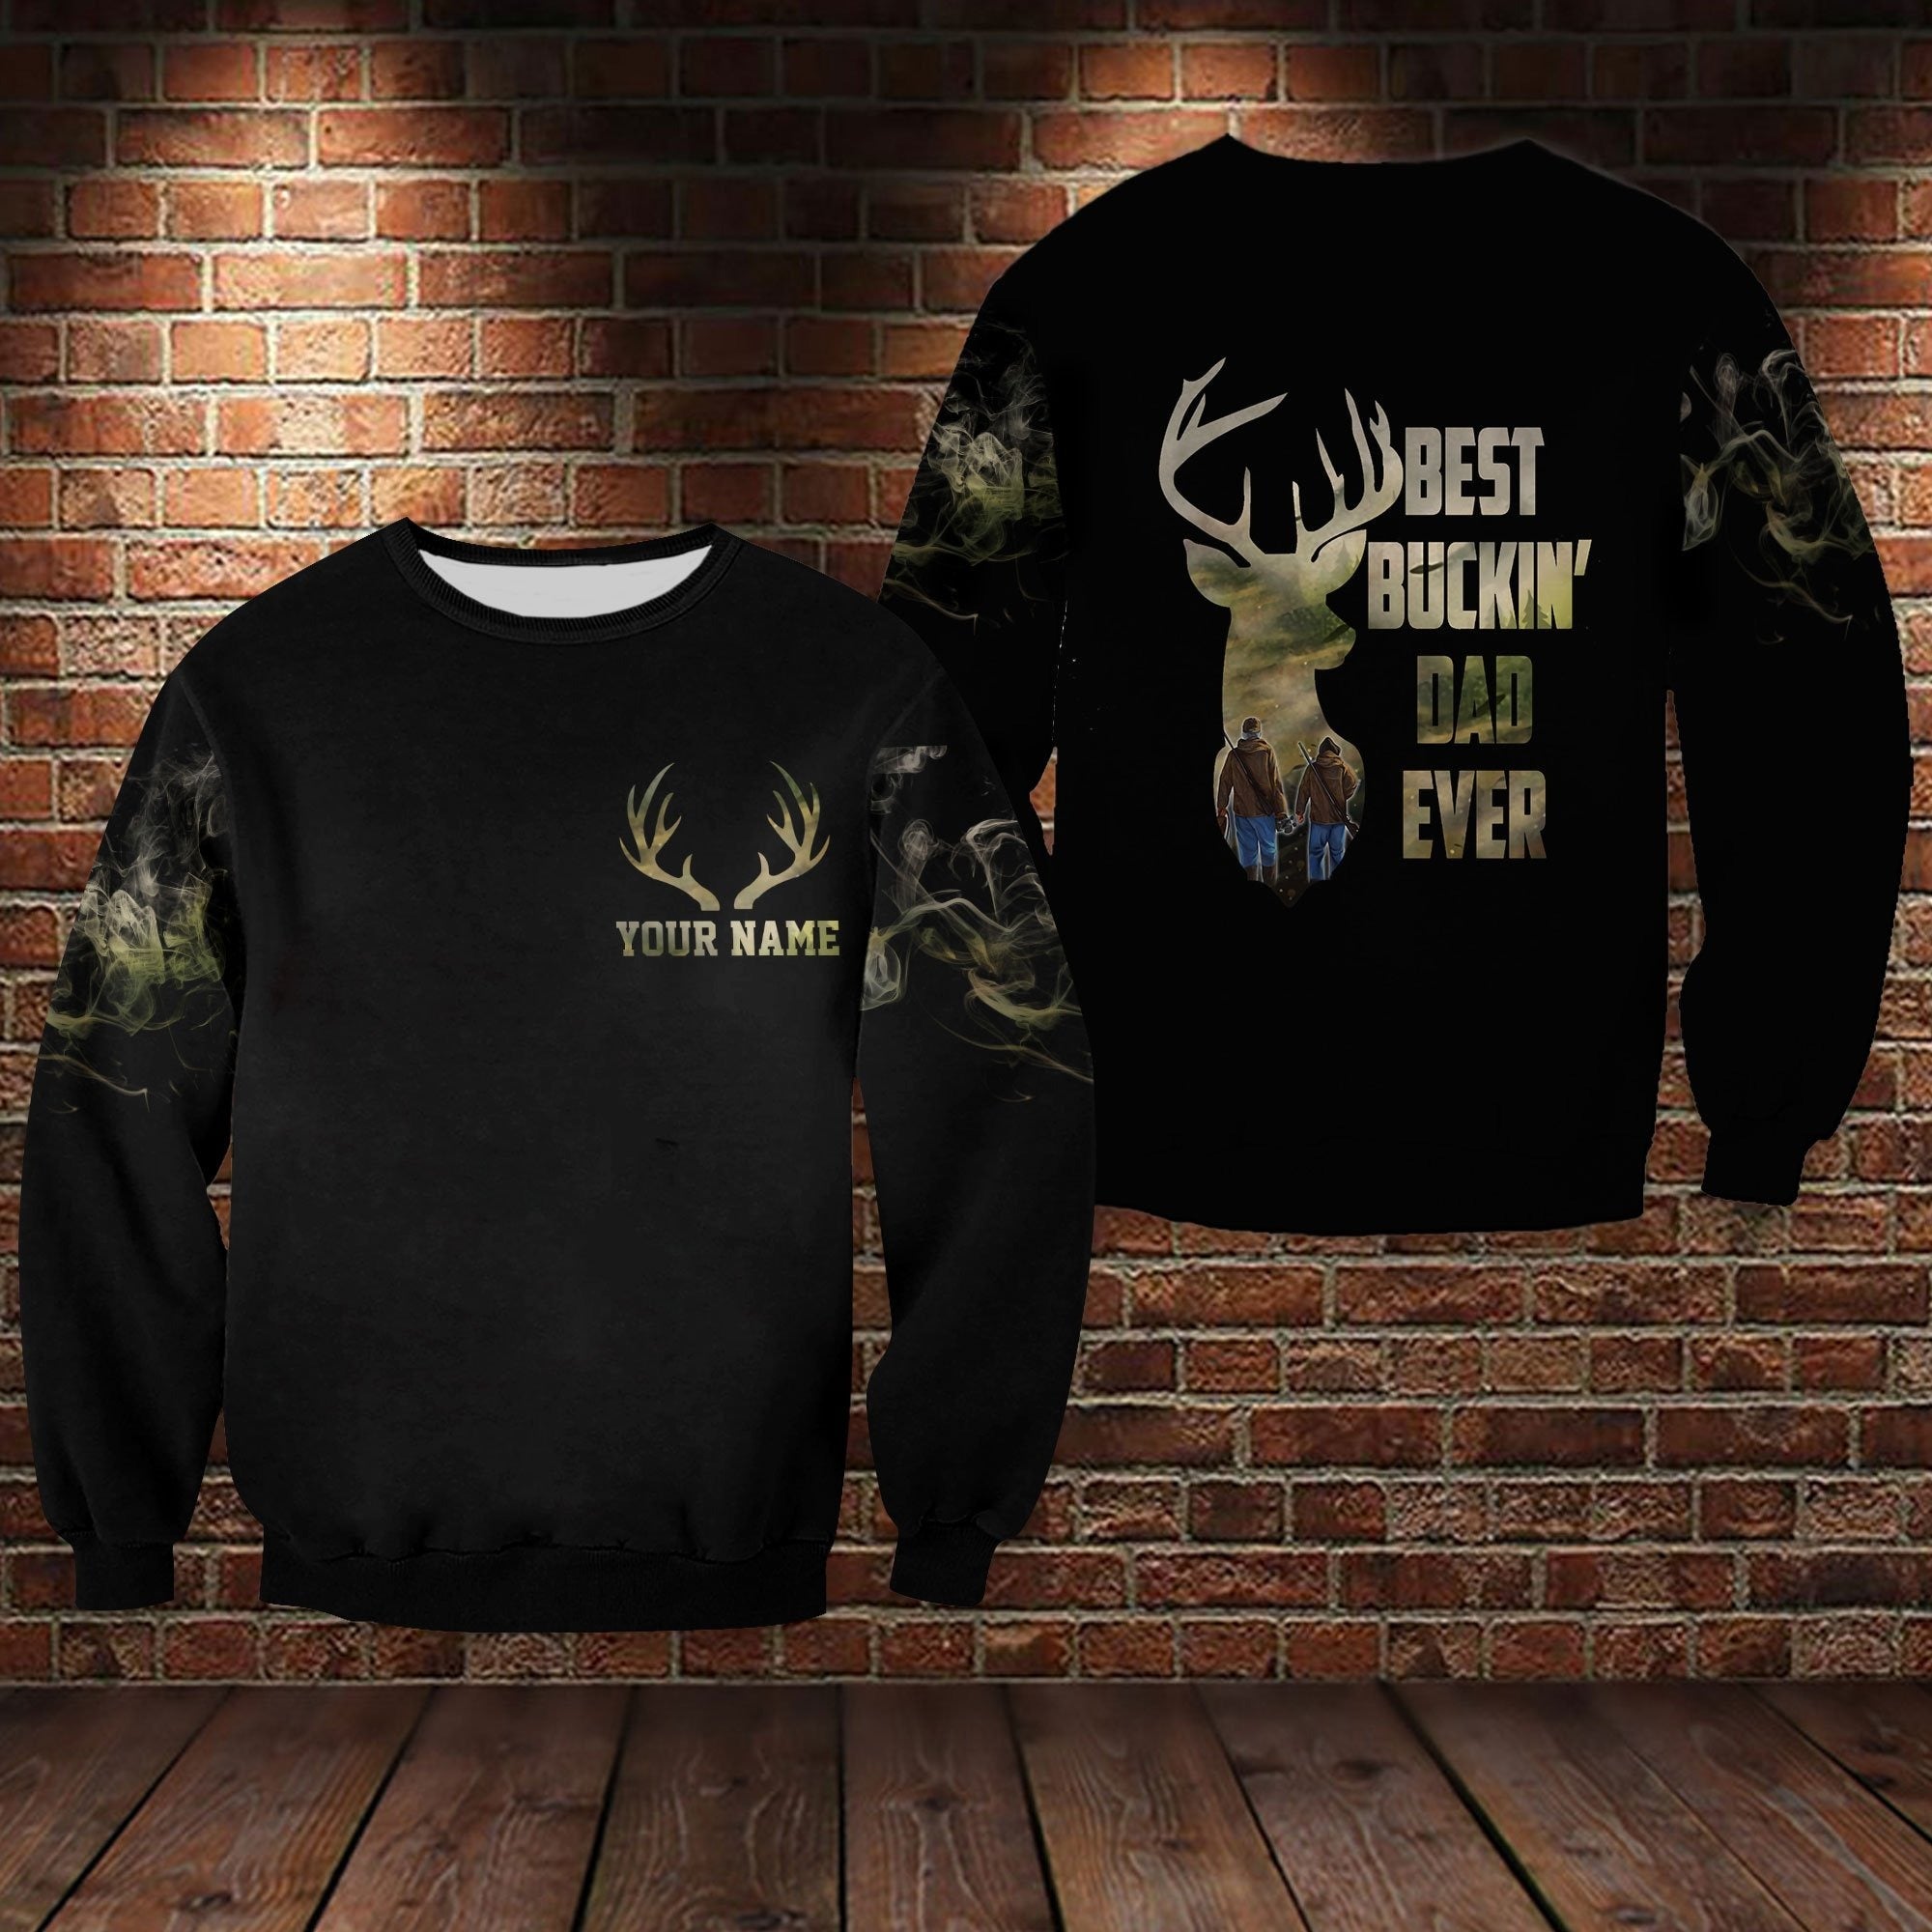 Custom Hunting Best Buckin’ Dad Ever 3D All Over Printed Shirt Hoodie/ Father’S Day Gift From Daughter Son